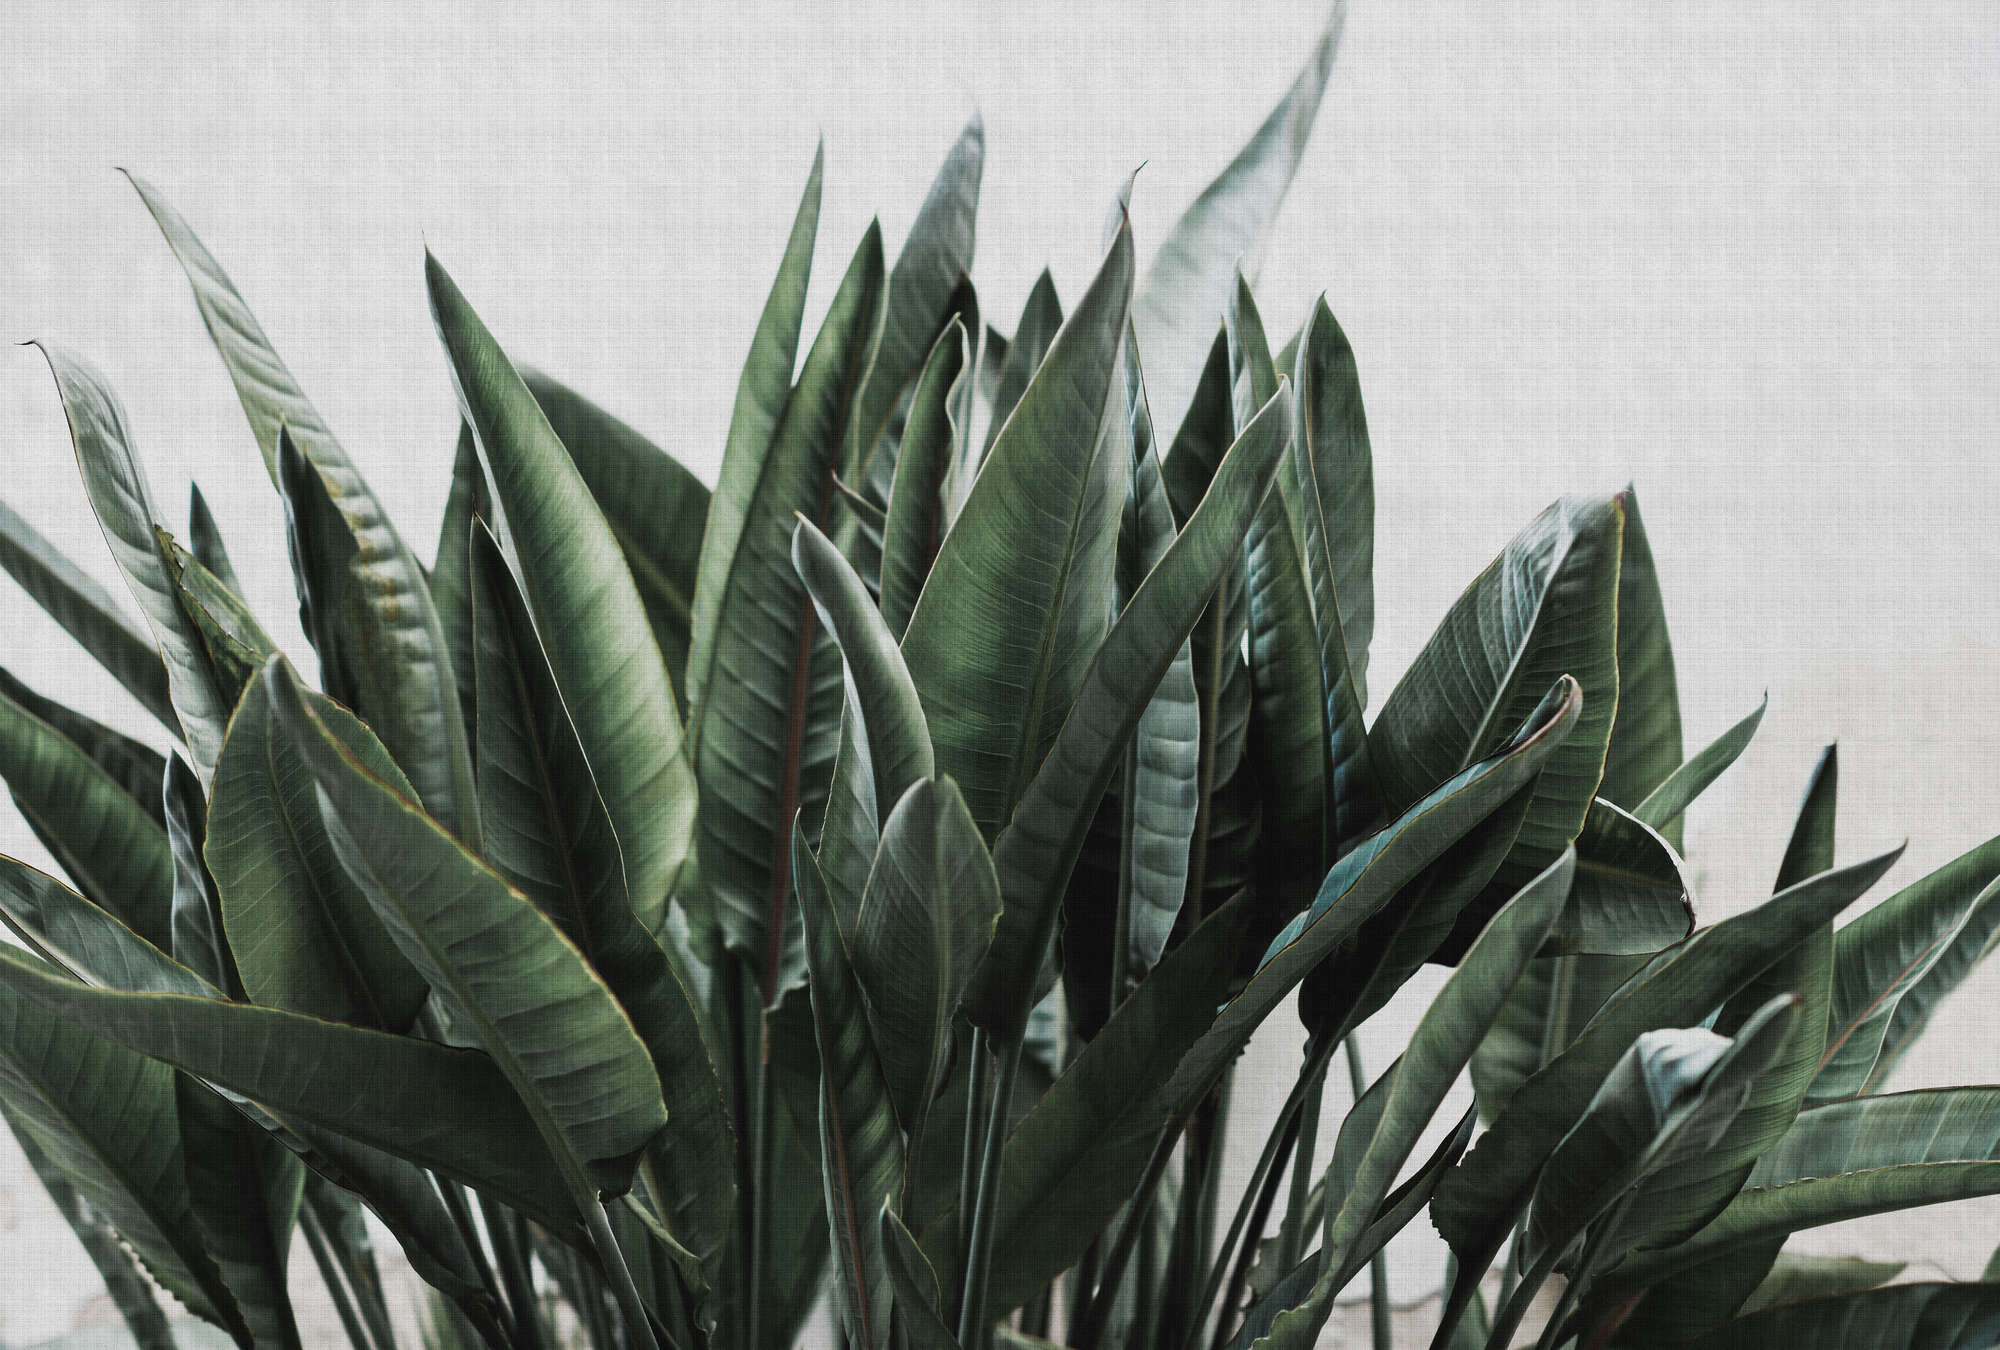             Urban jungle 2 palm leaves photo wallpaper, natural linen structure exotic plants - Grey, Green | Pearl smooth non-woven
        